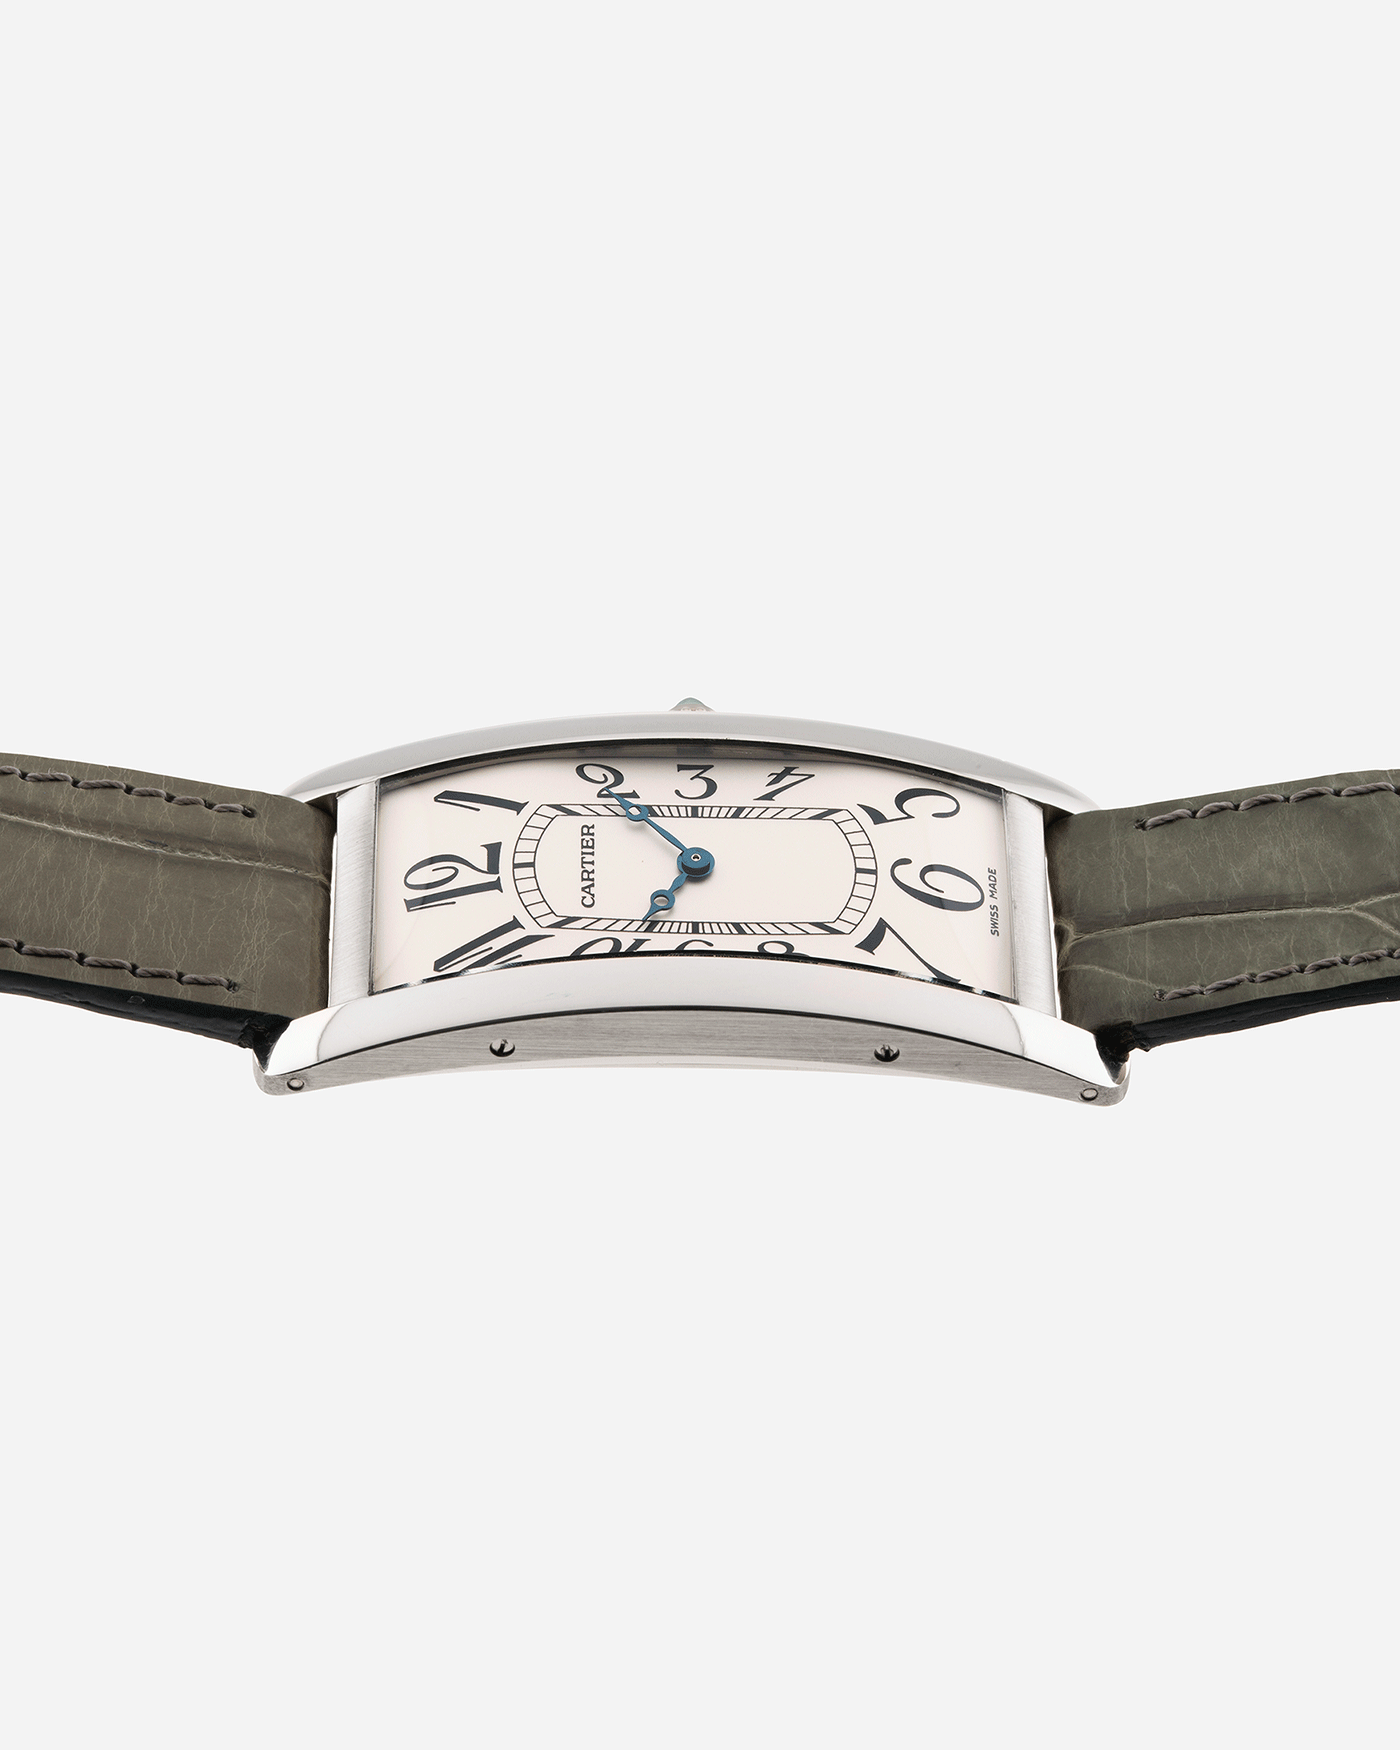 Brand: Cartier Year: 2005 Model: CPCP Collection Prive Tank Cintree Reference: 2843 Material: Platinum Movement: Jaeger Le Coultre manual wind caliber 9770MC Case Diameter: 46 x 23 mm Strap: Moss Green Alligator Strap with Platinum Cartier Deployant Clasp